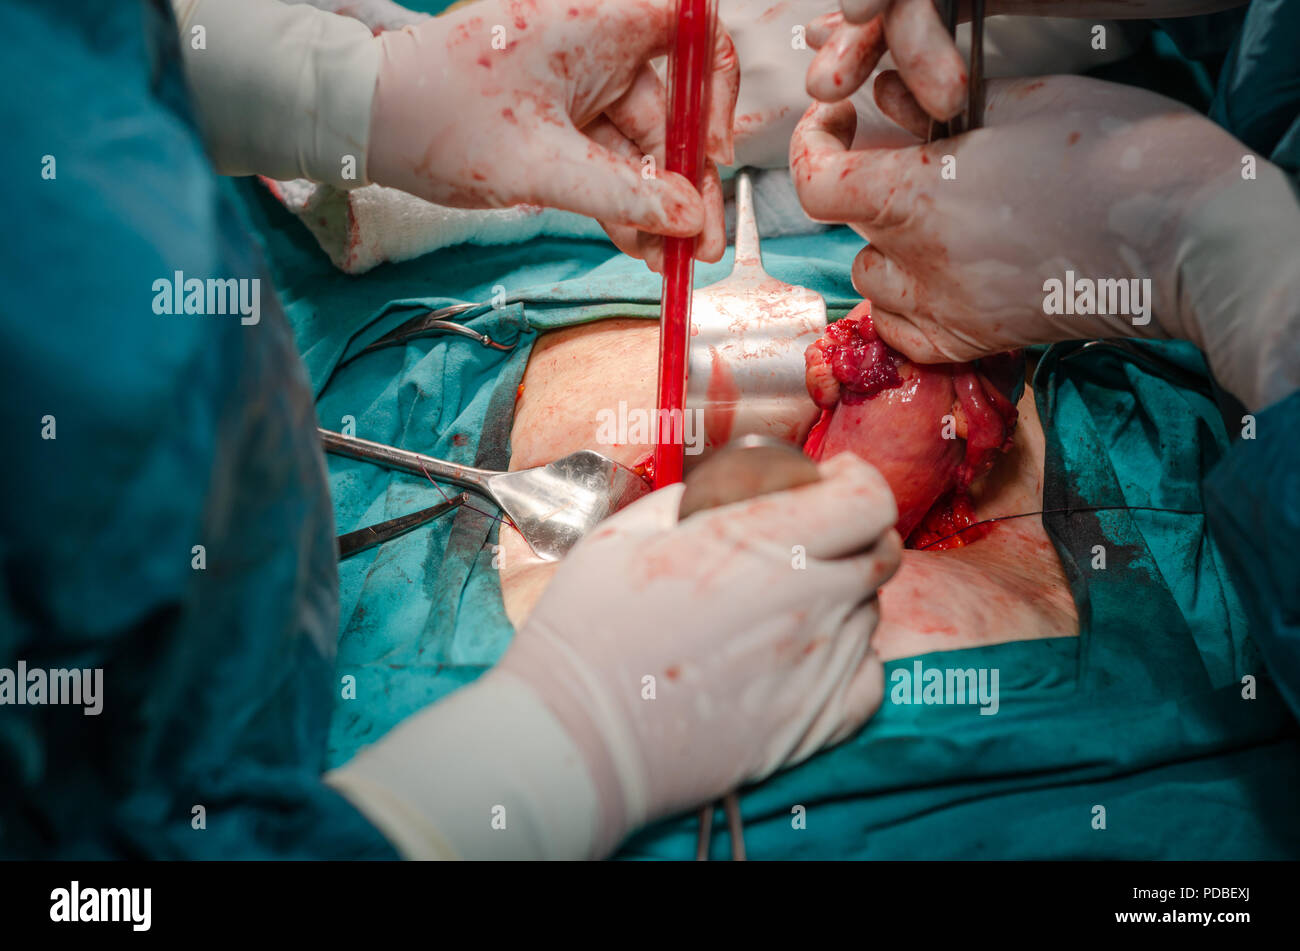 Surgeon pulls uterus out of the body holding by surgical tools close-up during the hysterectomy surgery Stock Photo